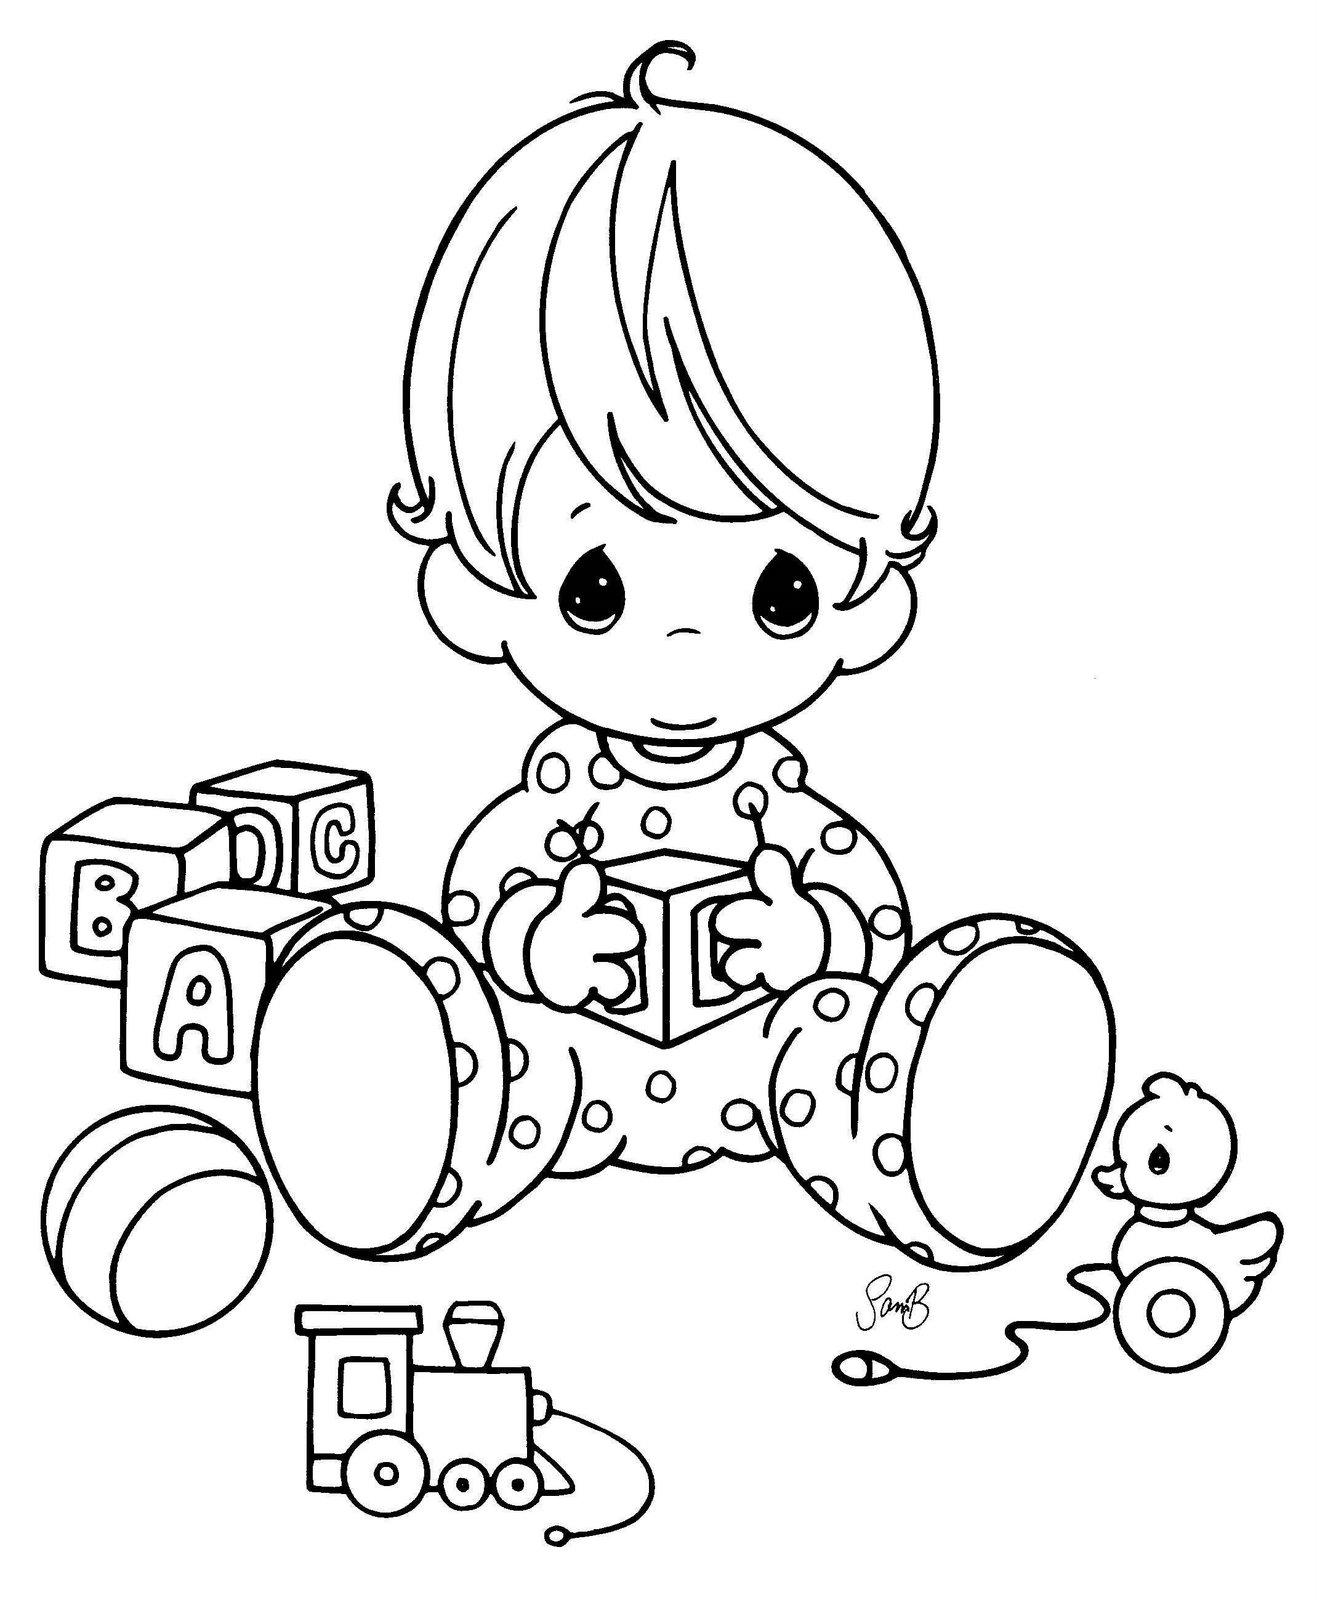 Baby Pictures Coloring Pages Pdf - Free Baby Pictures Coloring Pages